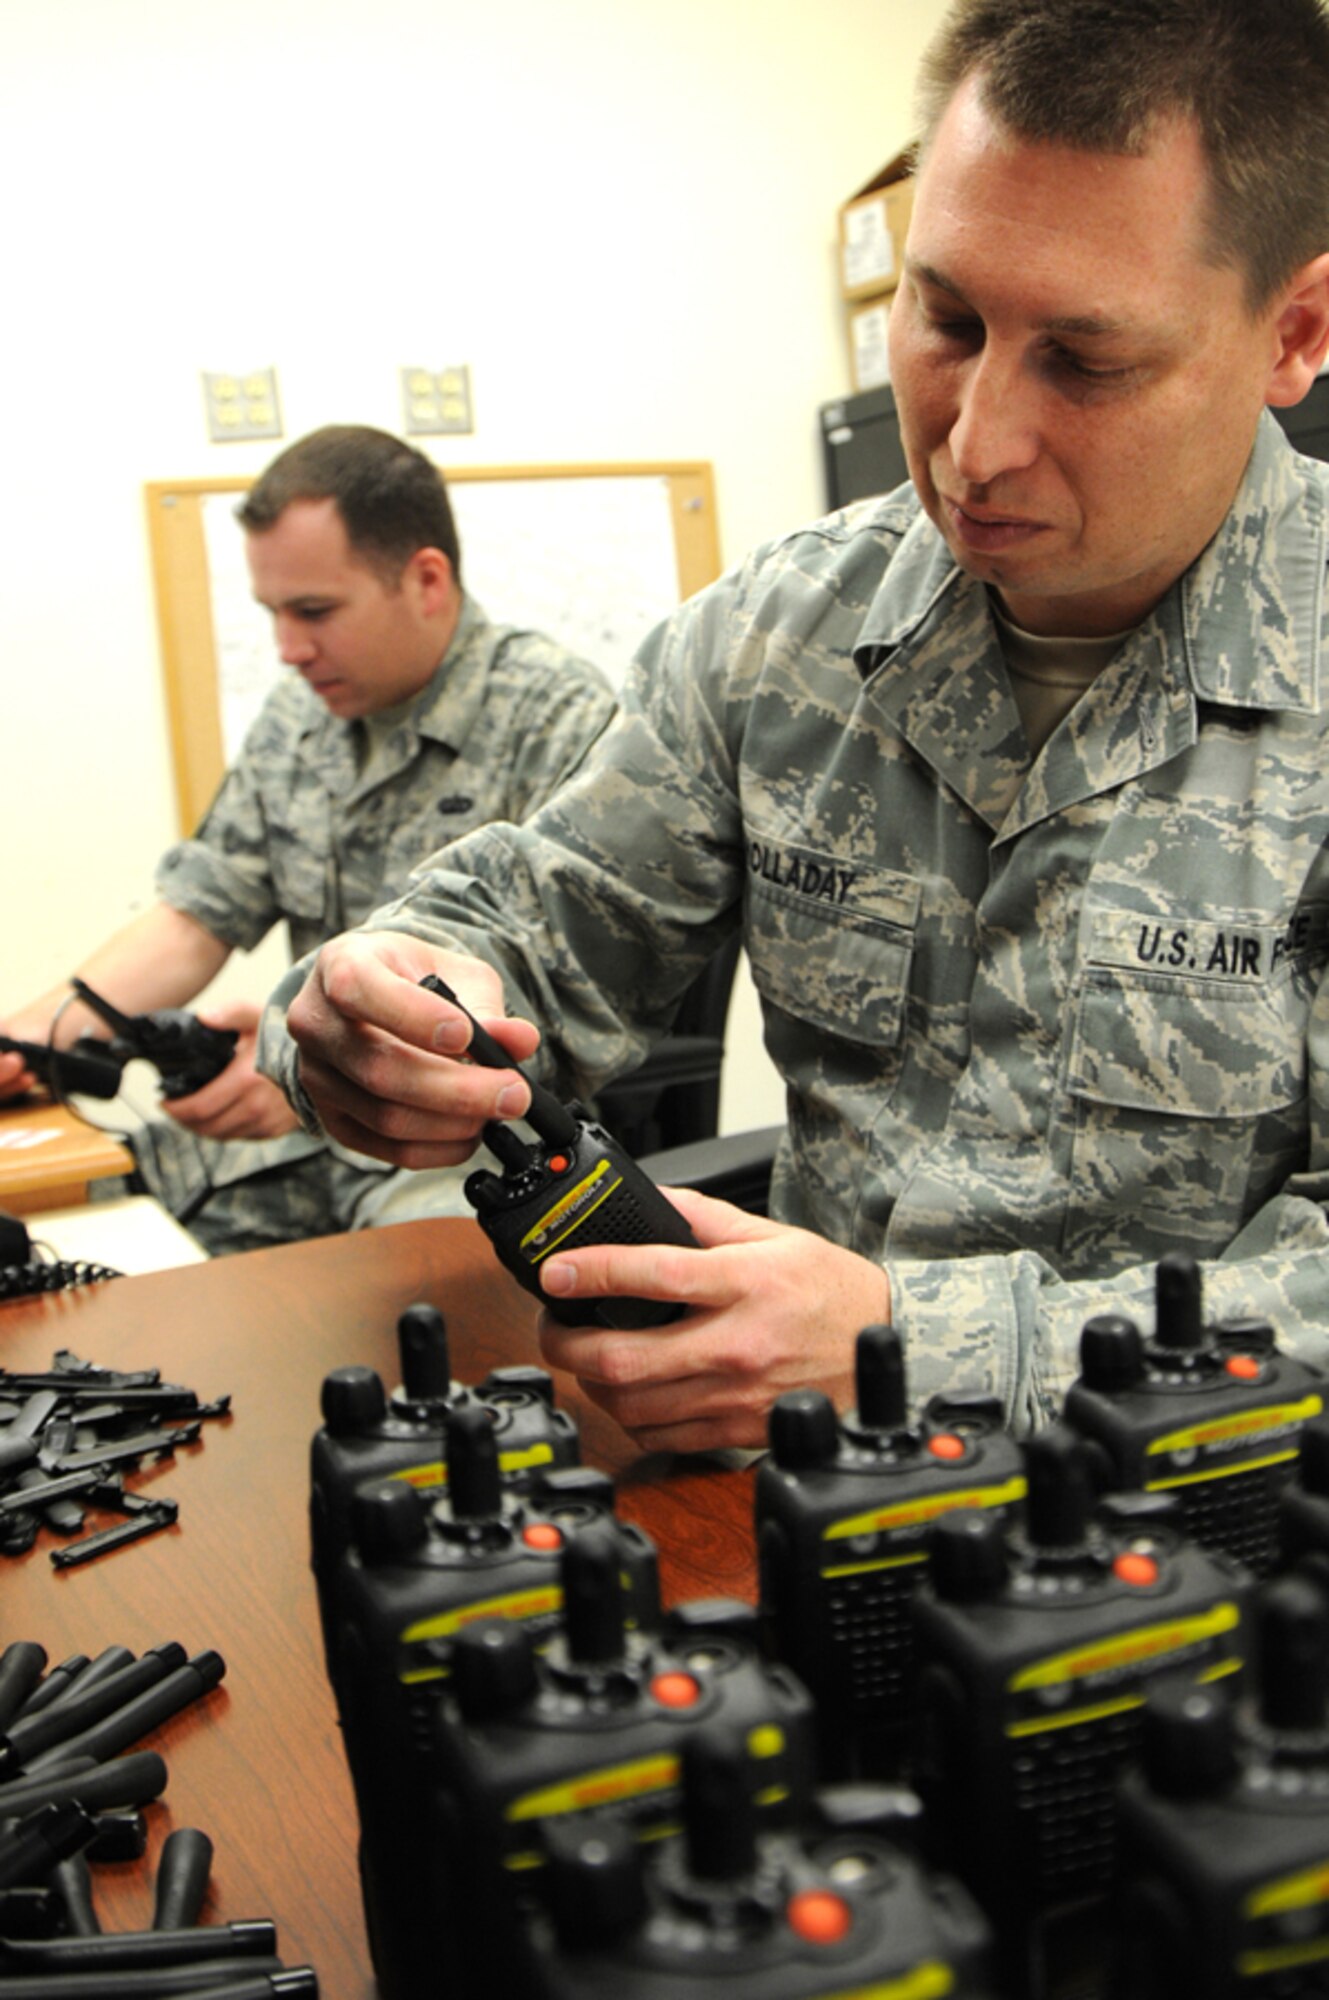 As more than 400 new radios arrived from National Guard Bureau on Apr. 24, Staff Sgt. Mark Holladay, foreground, from the 124th Communications Flight, prepares the encrypted radios by attaching clips, antennas and the serial number system and passes each radio for the final encrypting process performed by Tech. Sgt. Robert Kolenic. (U.S. Air Force photo by Tech. Sgt. Becky Vanshur)